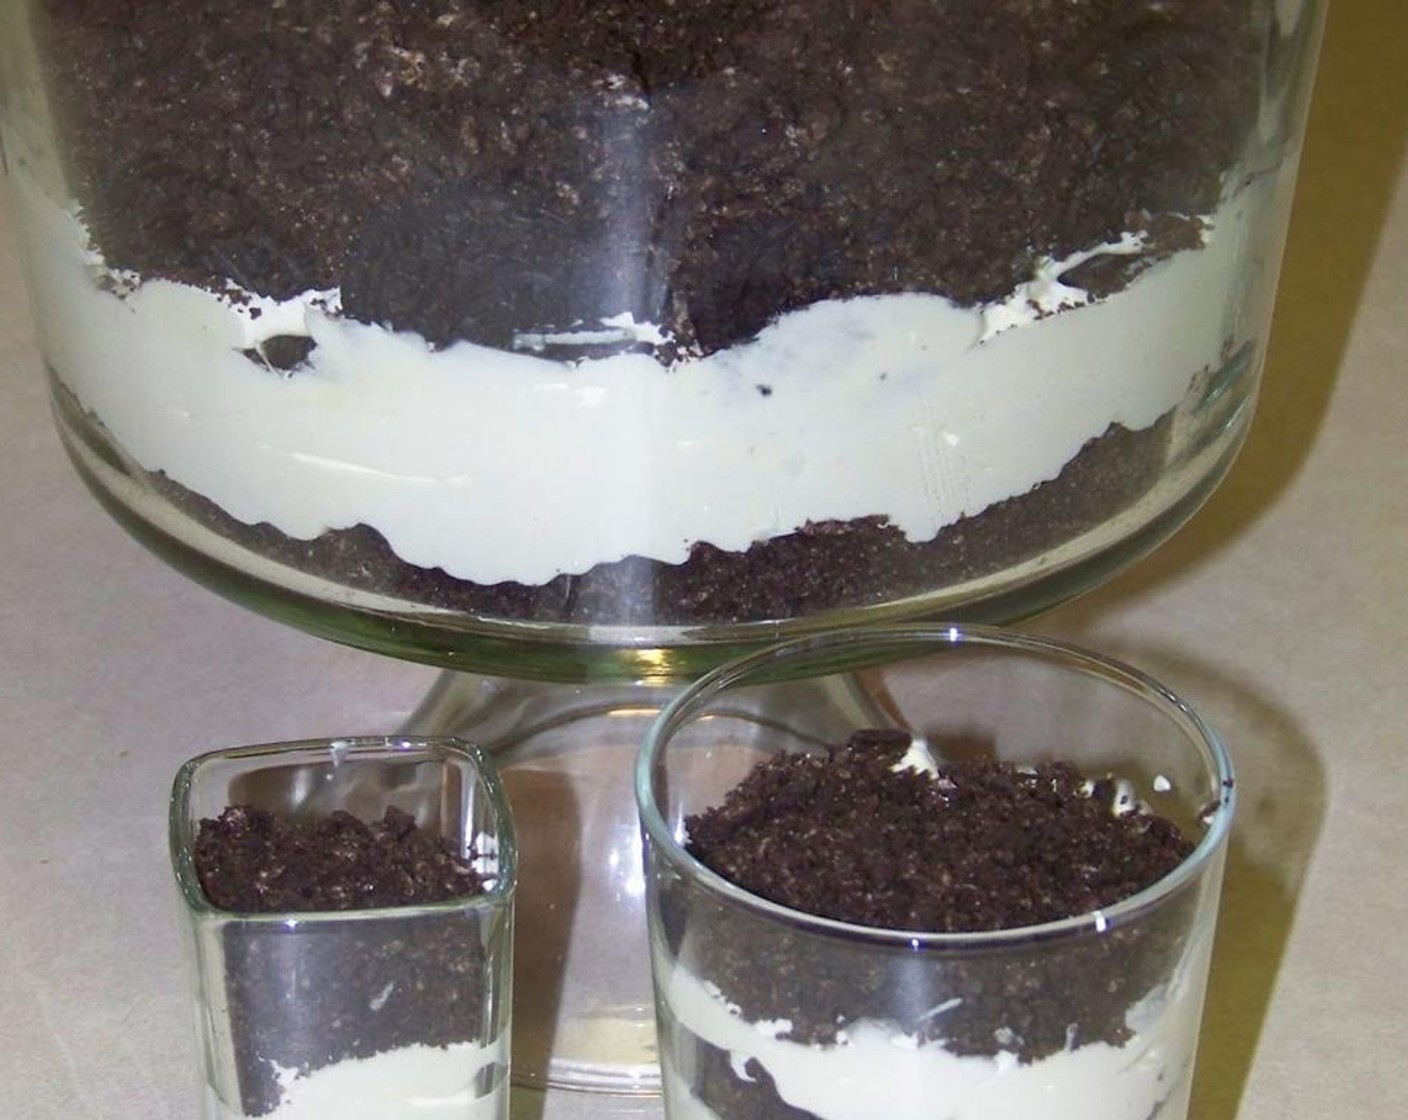 step 3 To make the trifles, make a thin oreo layer and top with the custard, repeating to make alternate layers. Then top with the rest of the Whipped Topping (3 3/4 cups).